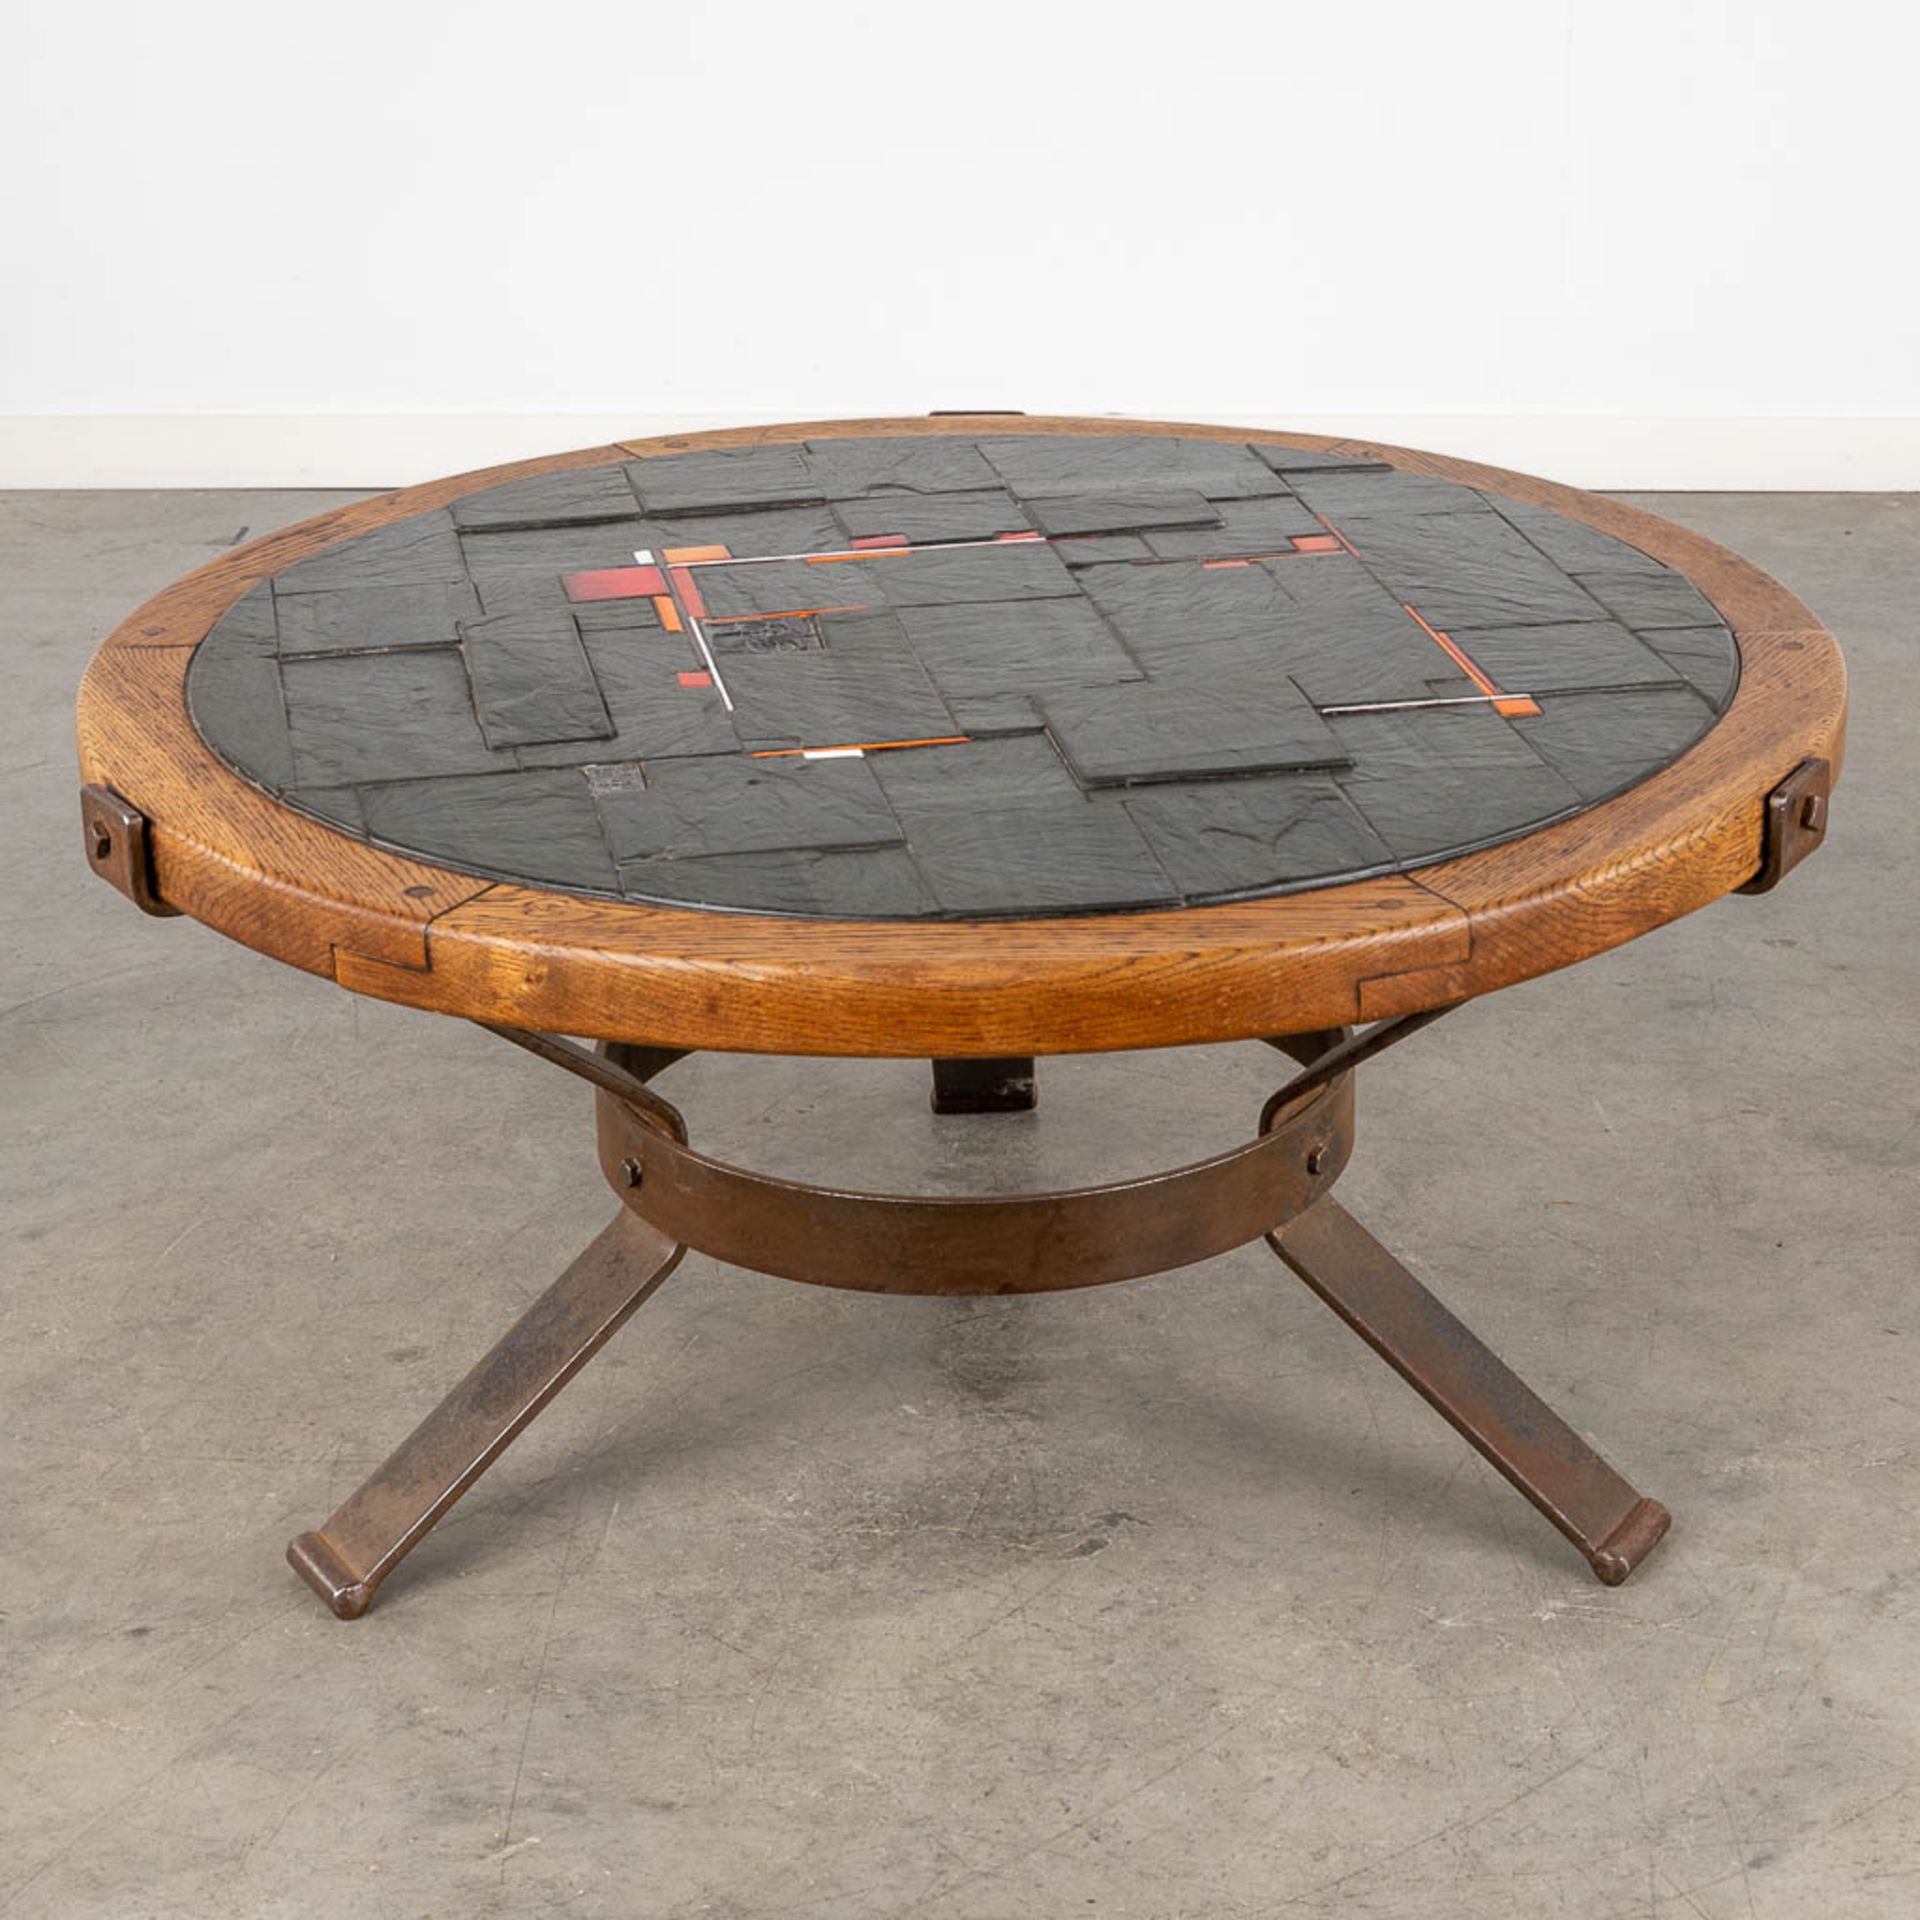 A mid-century tile, wood and metal coffee table. Circa 1960. (H:43 x D:87 cm) - Image 4 of 12